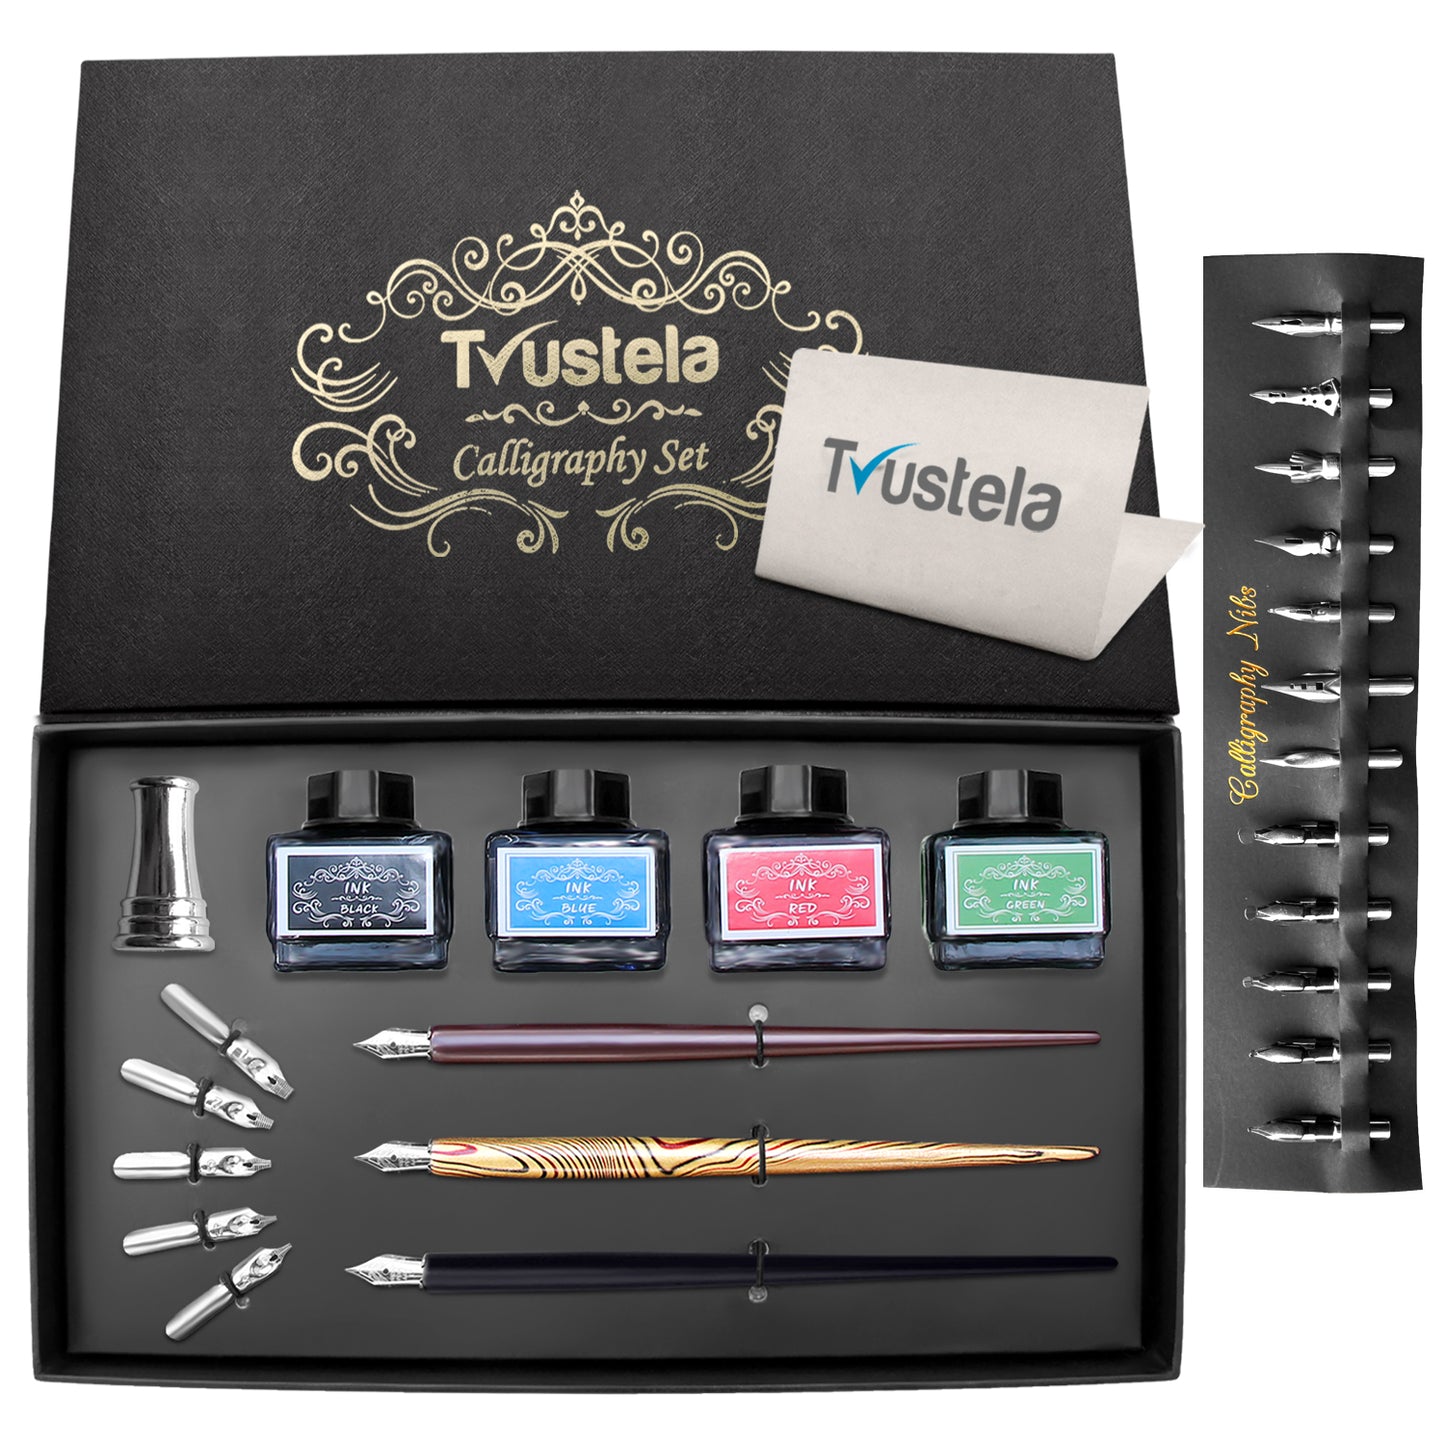 Calligraphy Black Feather Pen And Ink Set – Trustela